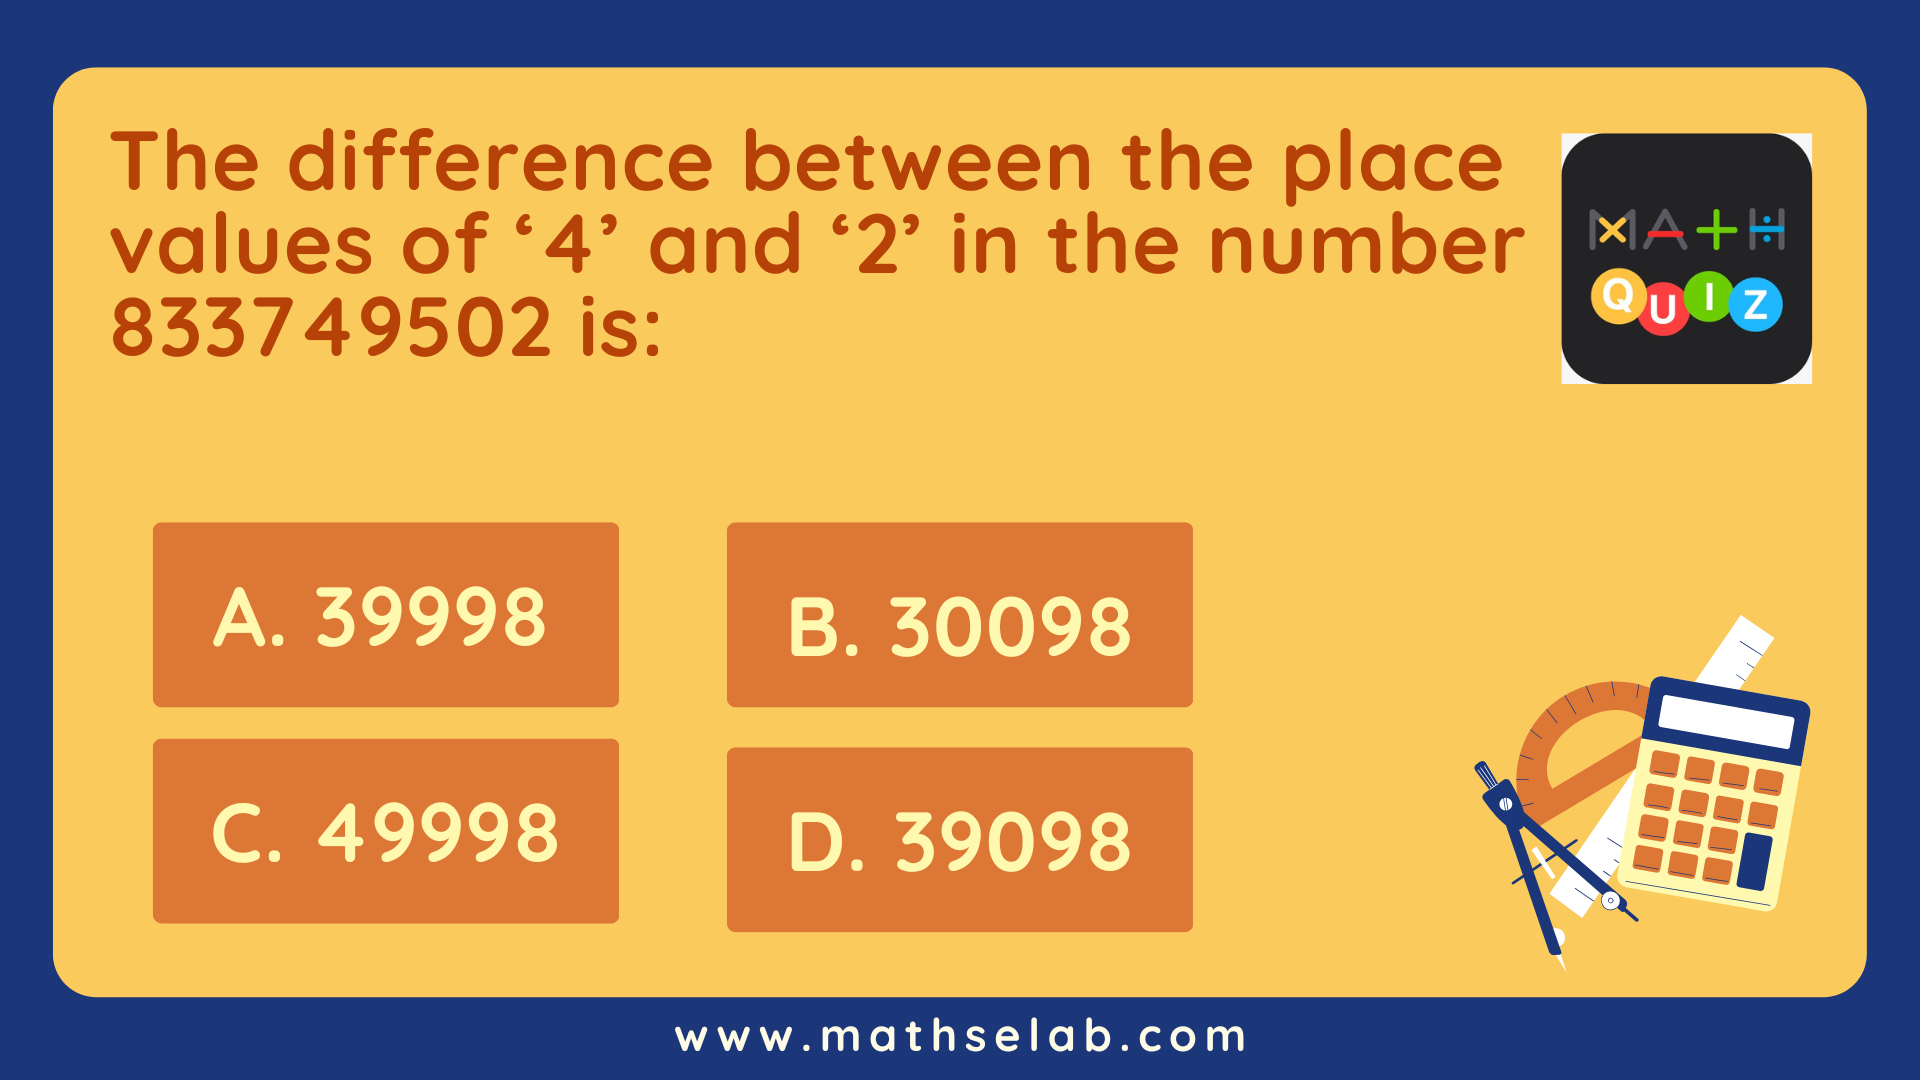 The difference between the place values of '4' and '2' in the number 833749502 is: